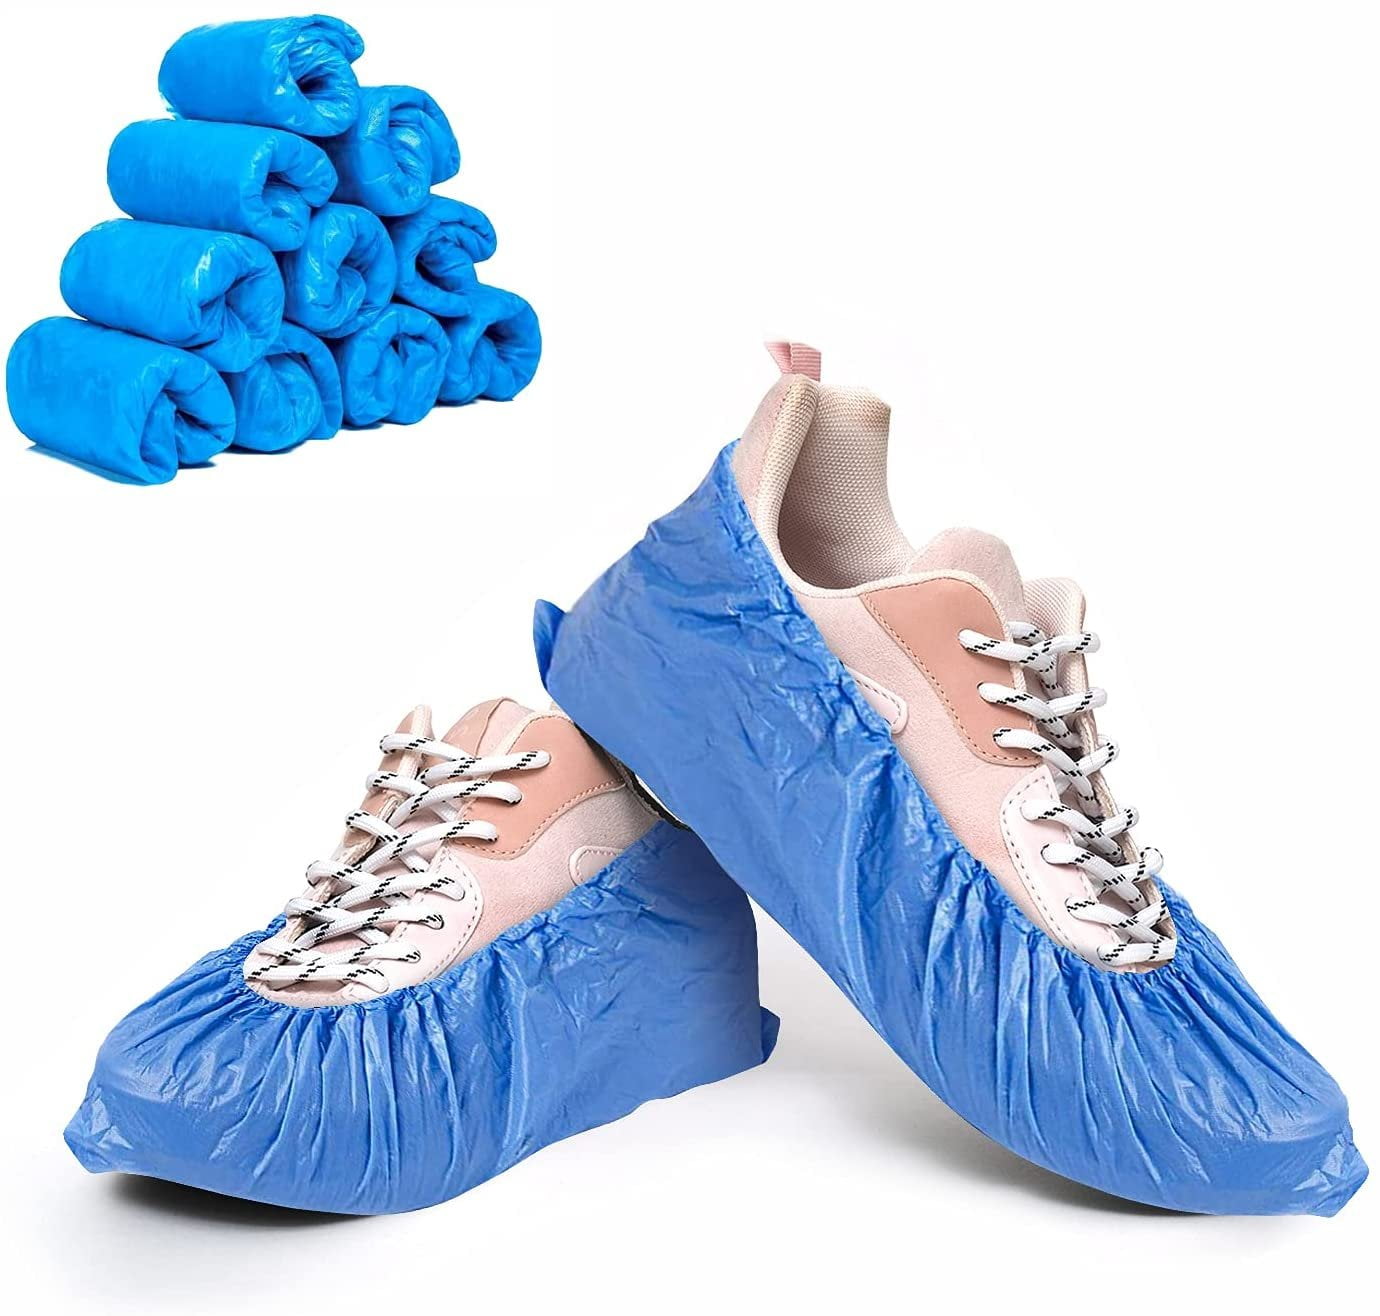 Unisex Disposable Shoe Covers Plastic Overshoes Blue Floor Boot Protector Cover 